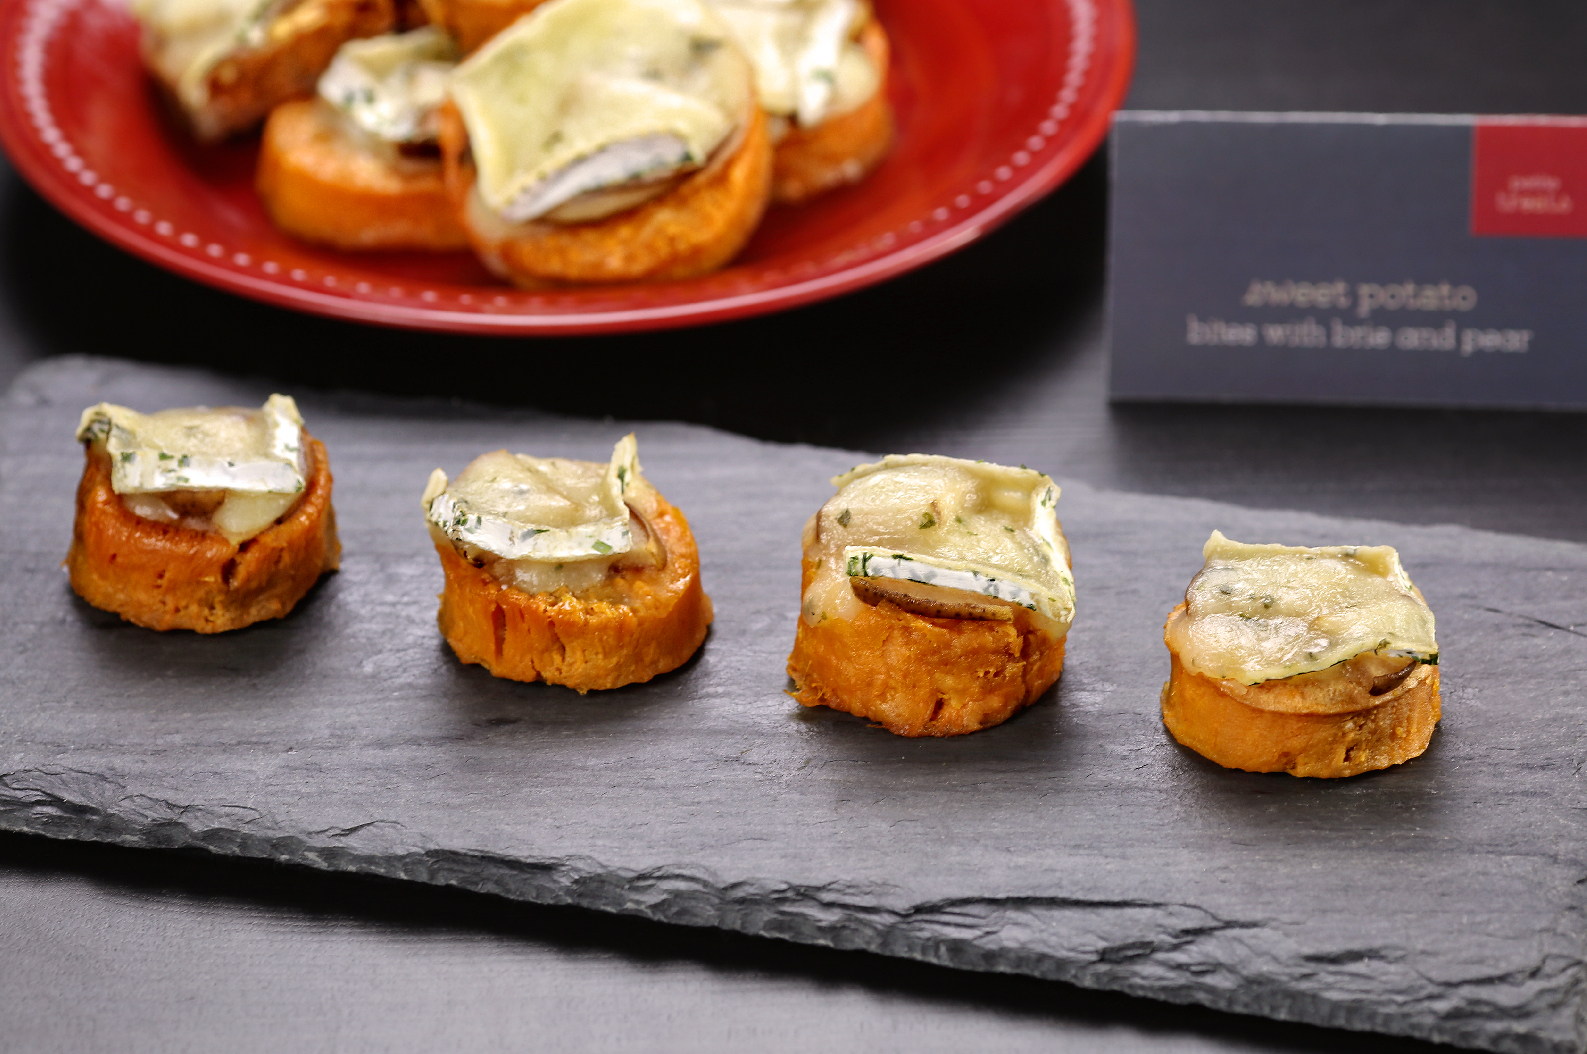 Sweet Potato Bites with Brie and Pear